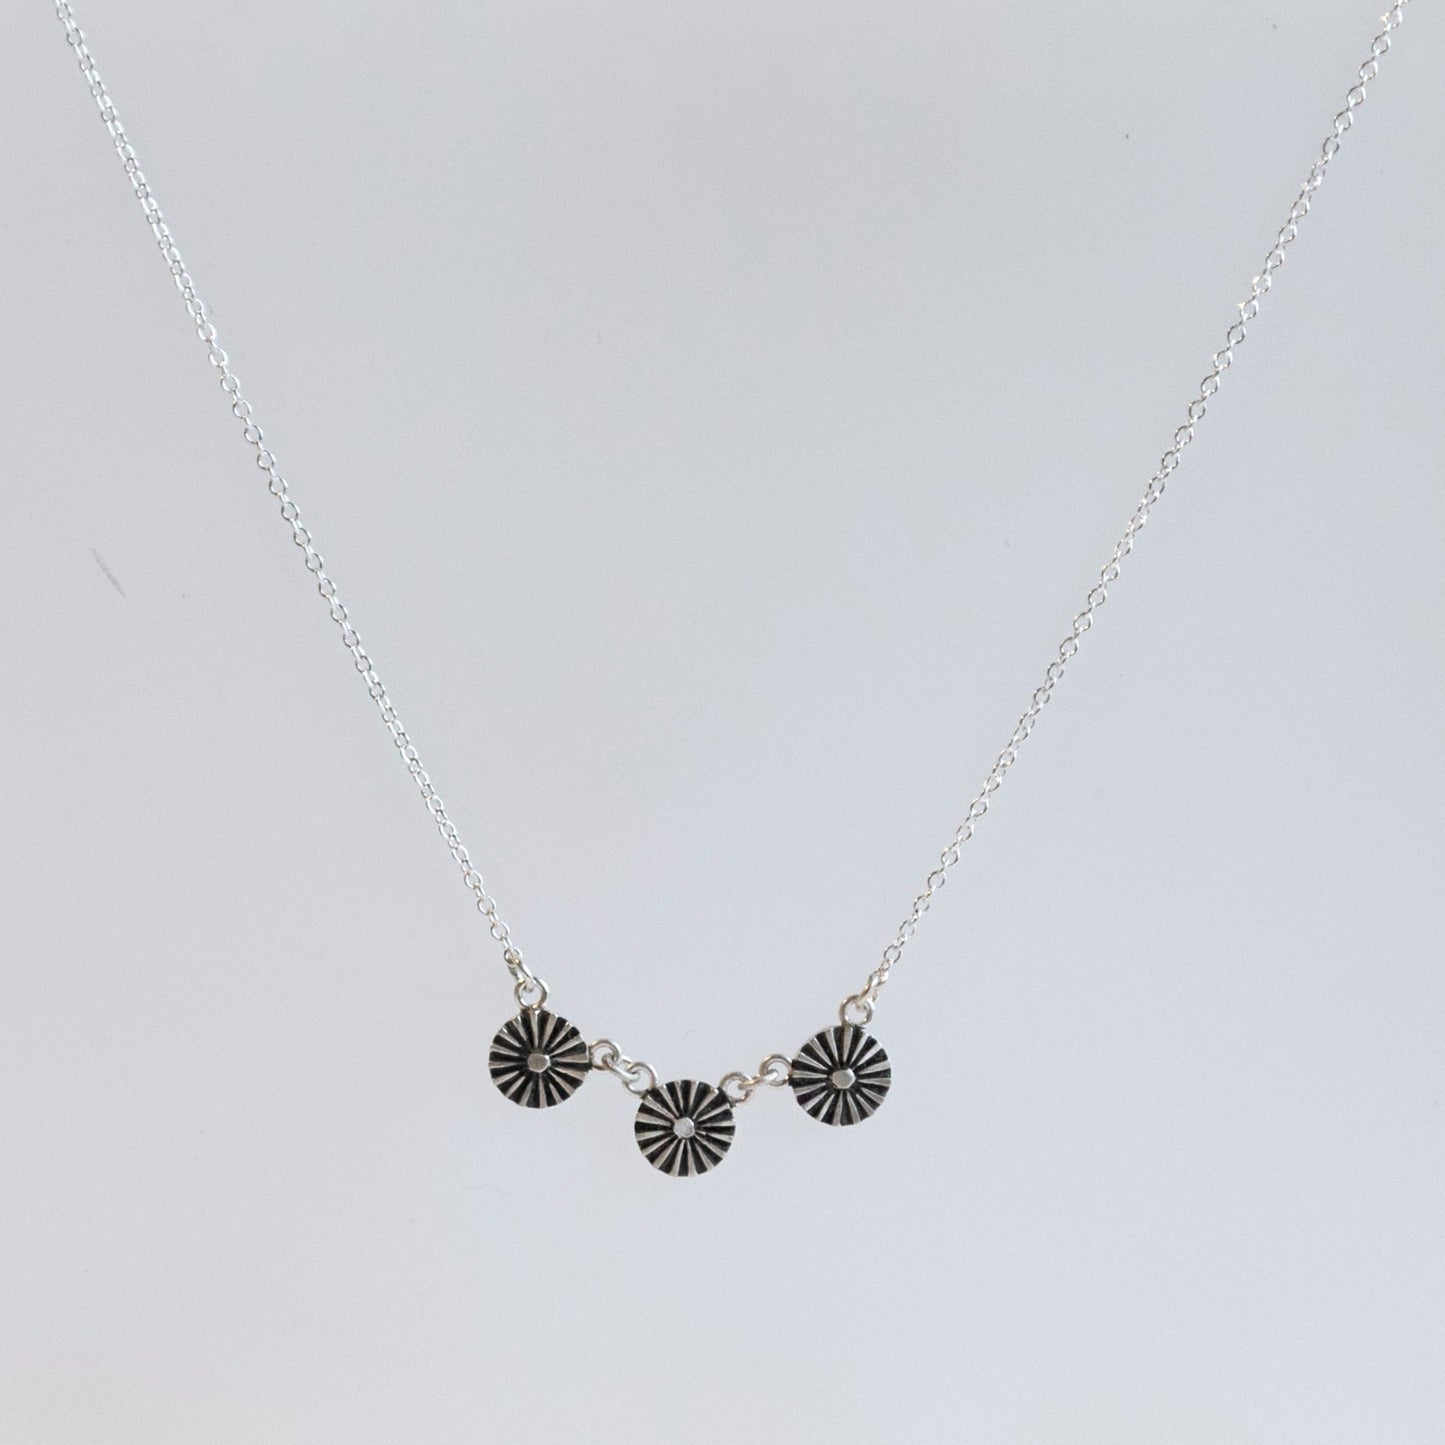 Andrea Mueller, The Daisies Necklace (Three Daisies)